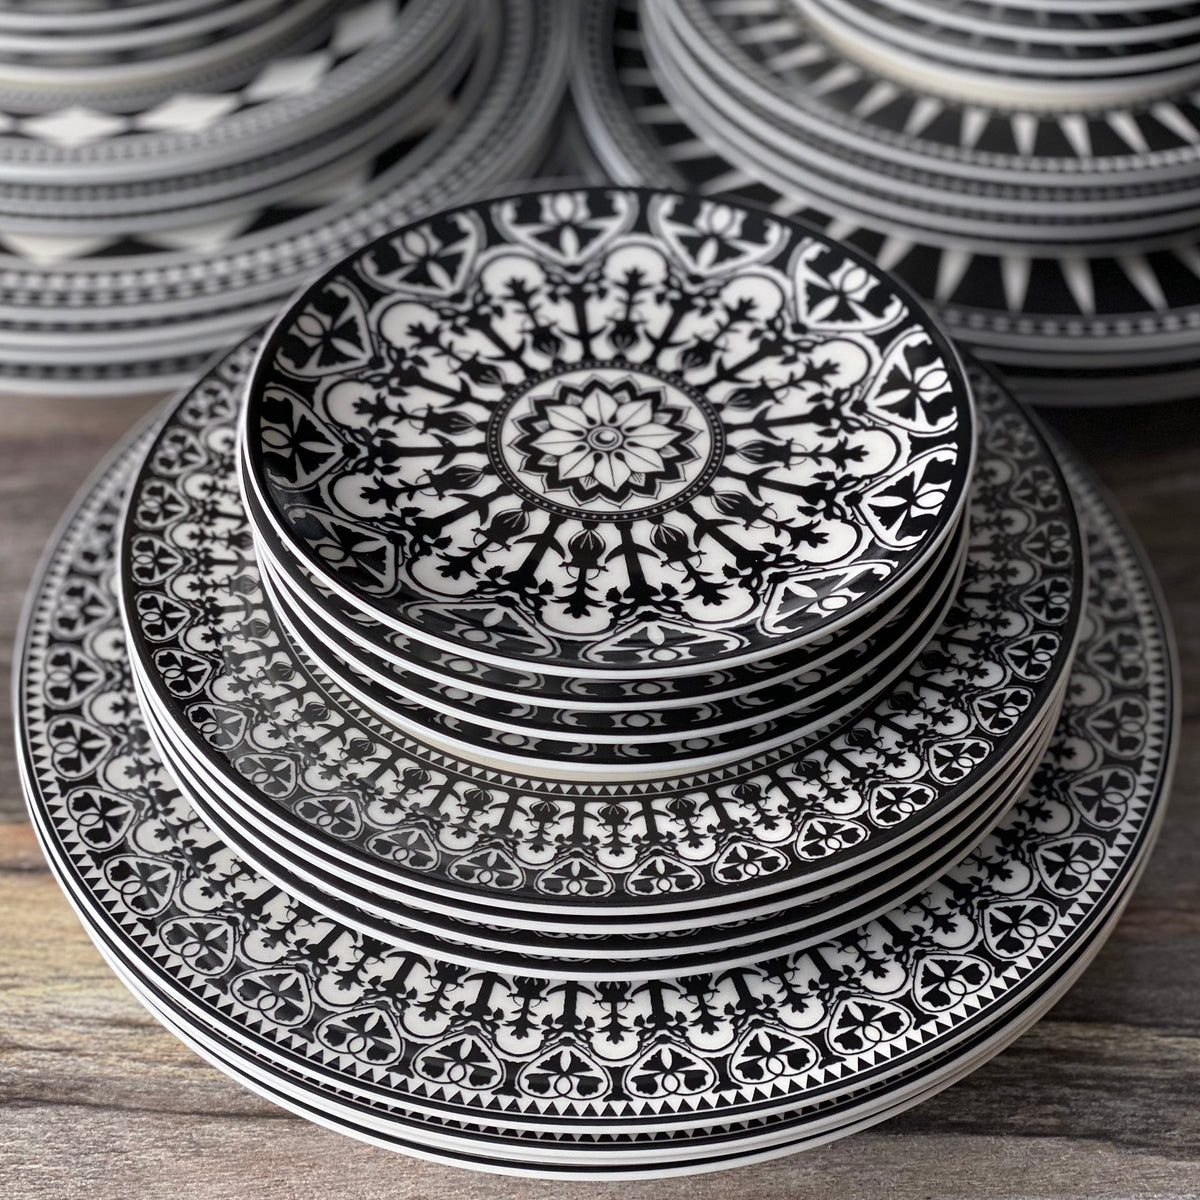 Stacks of black and white Casablanca Rimmed Salad Plates with intricate, hand-decorated details on a wooden surface. Made from lead-free porcelain, these Caskata Artisanal Home dinnerware pieces elevate any dining experience with their timeless elegance.